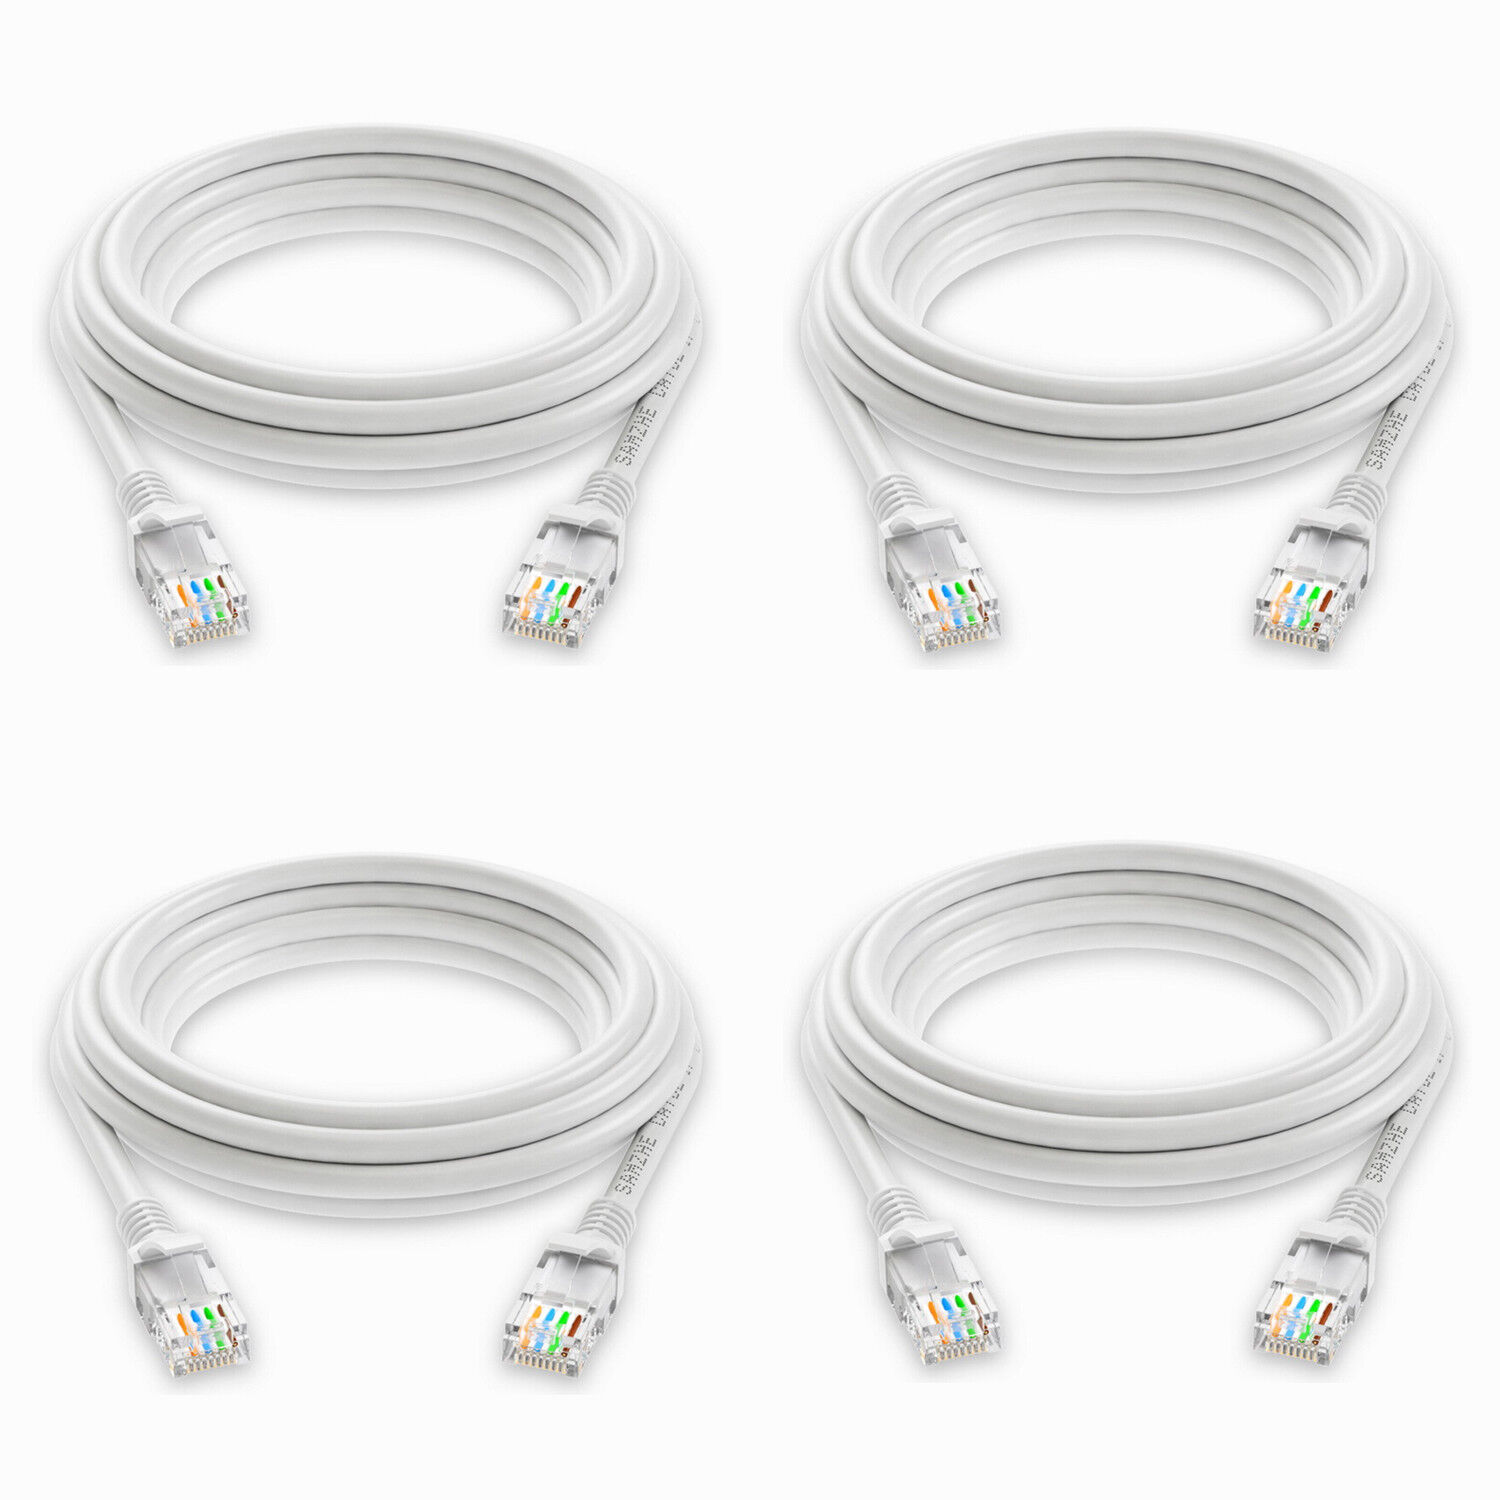 4-Pack 25FT CAT5 Cat5e Ethernet Cable RJ45 Network Wire Router PoE Switch Cord